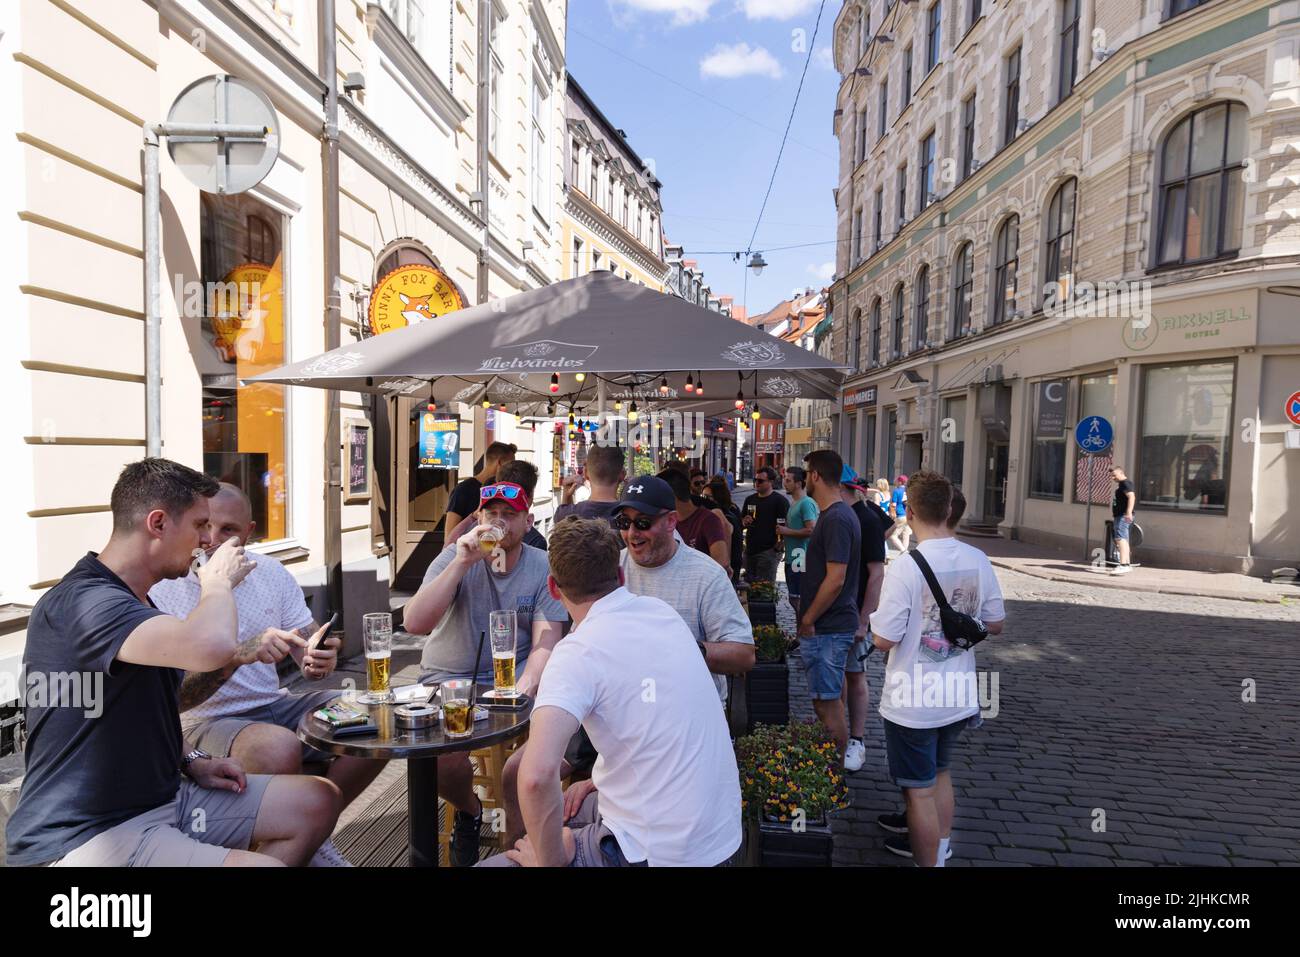 Riga bar; People drinking beer in the daytime at a bar, Riga Old Town, Riga, Latvia Europe. Latvia lifestyle Stock Photo